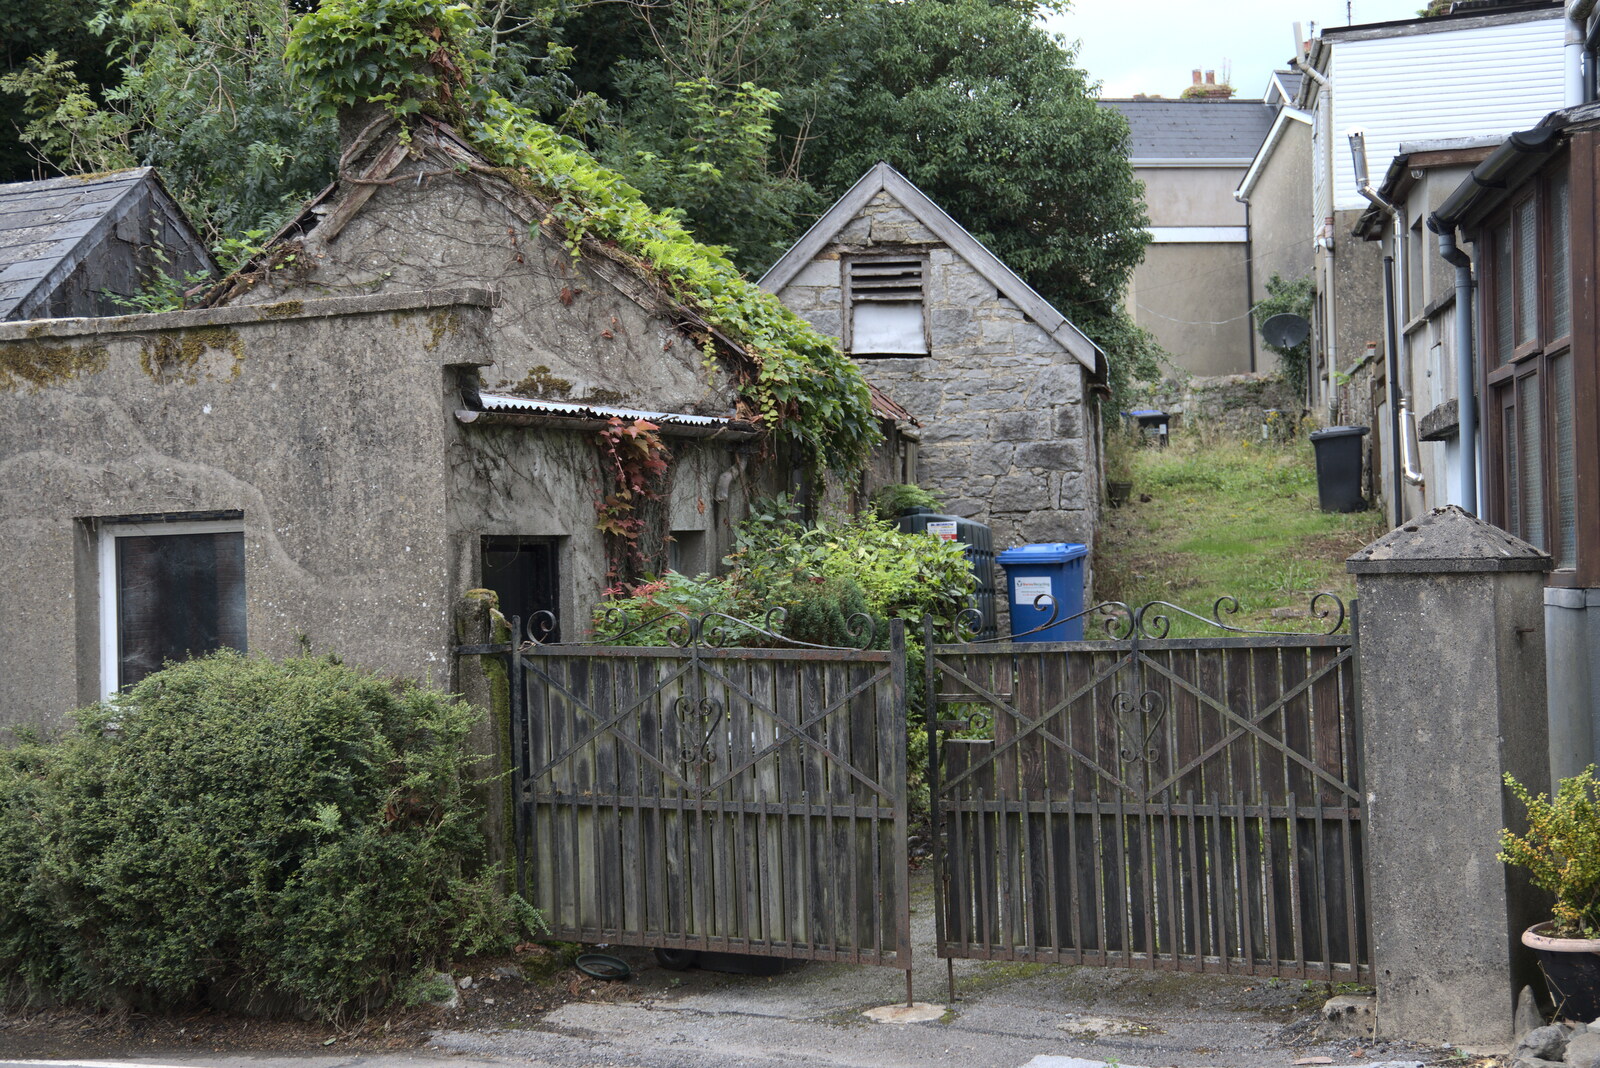 A Trip to Manorhamilton, County Leitrim, Ireland - 11th August 2021: Foliage reclaims more buildings